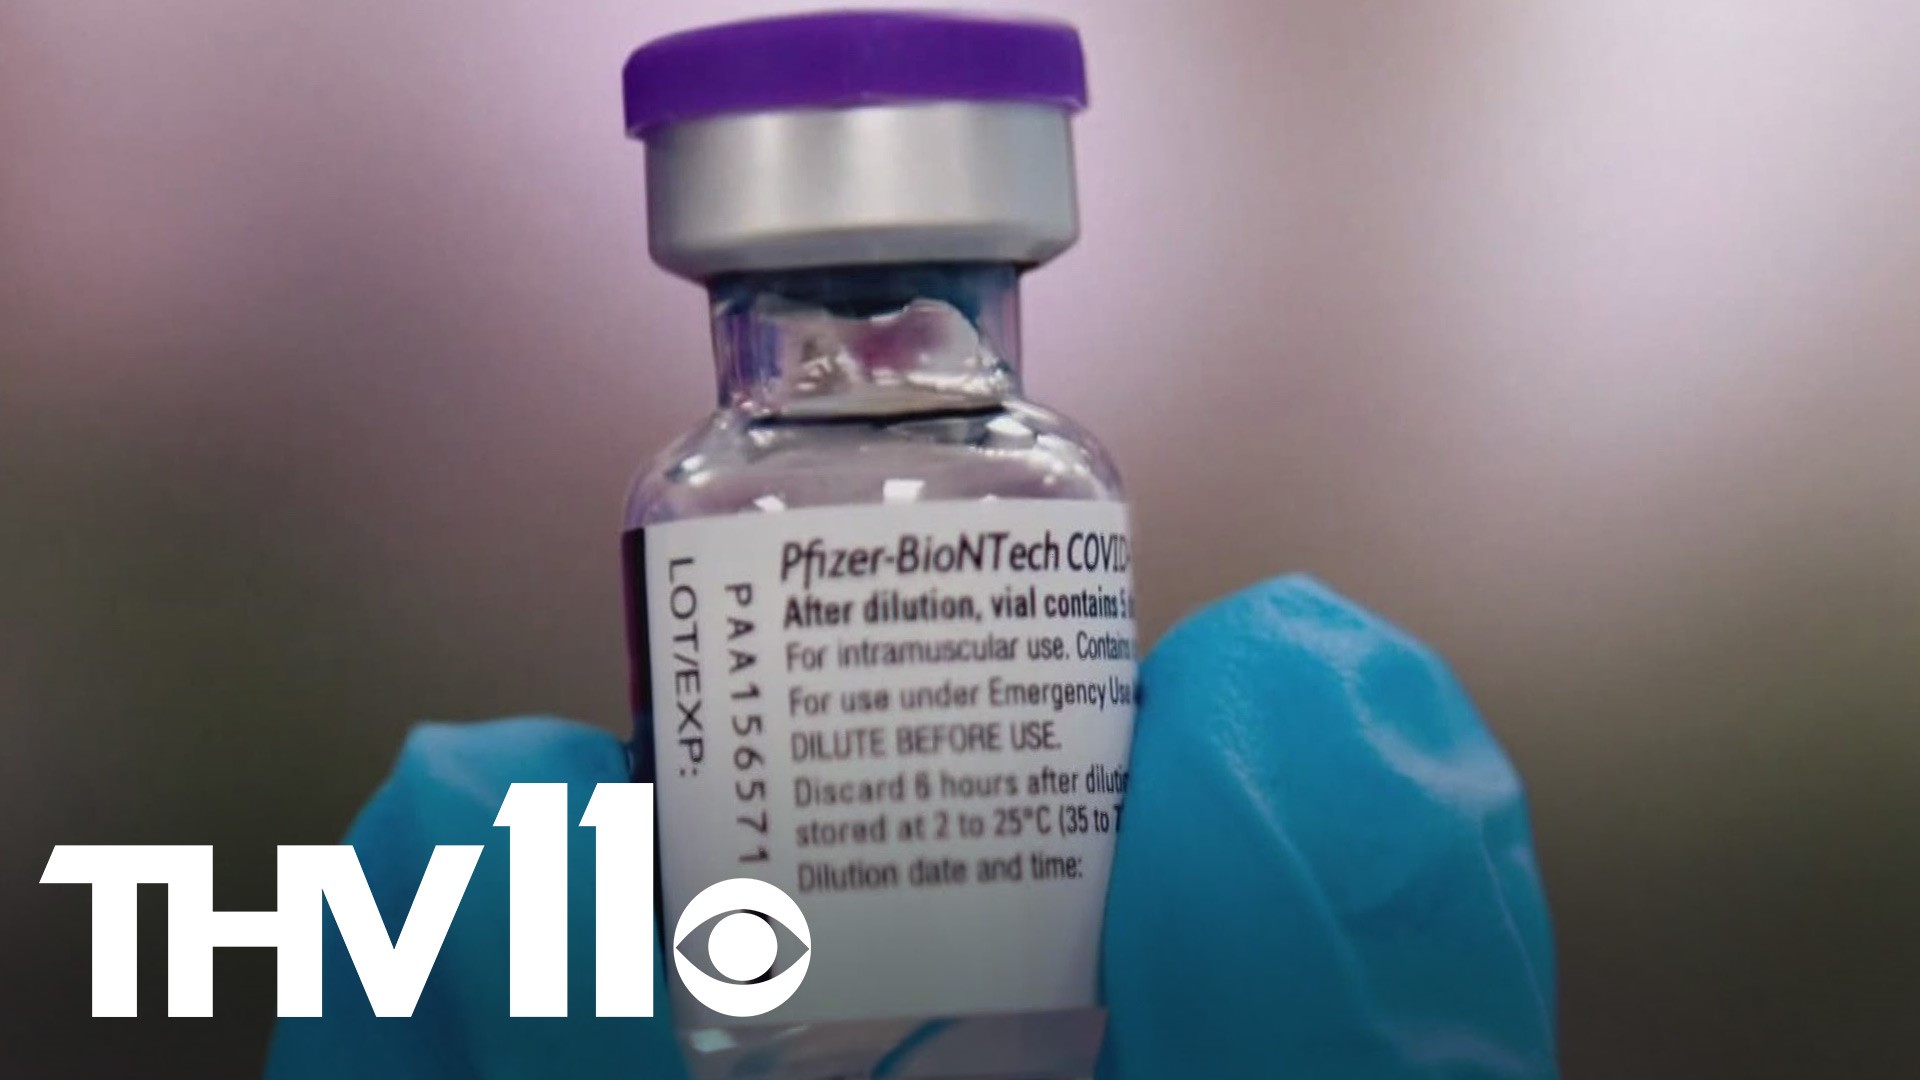 Pfizer said their vaccine is safe for kids, even going as far as to call its success "robust."